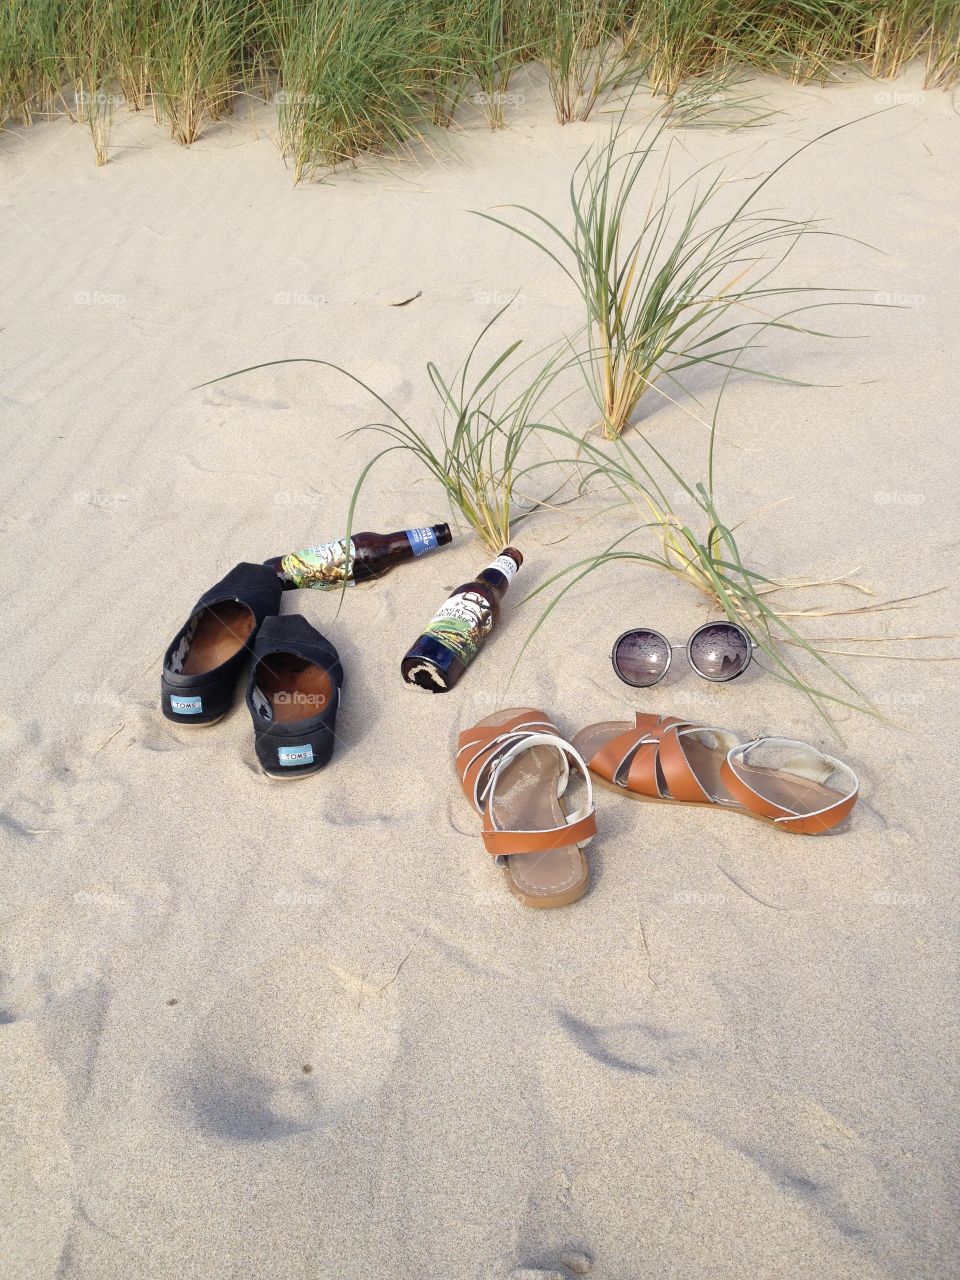 Toms and saltwater sandals on display in Manzanita beach on the Oregon Coast. 